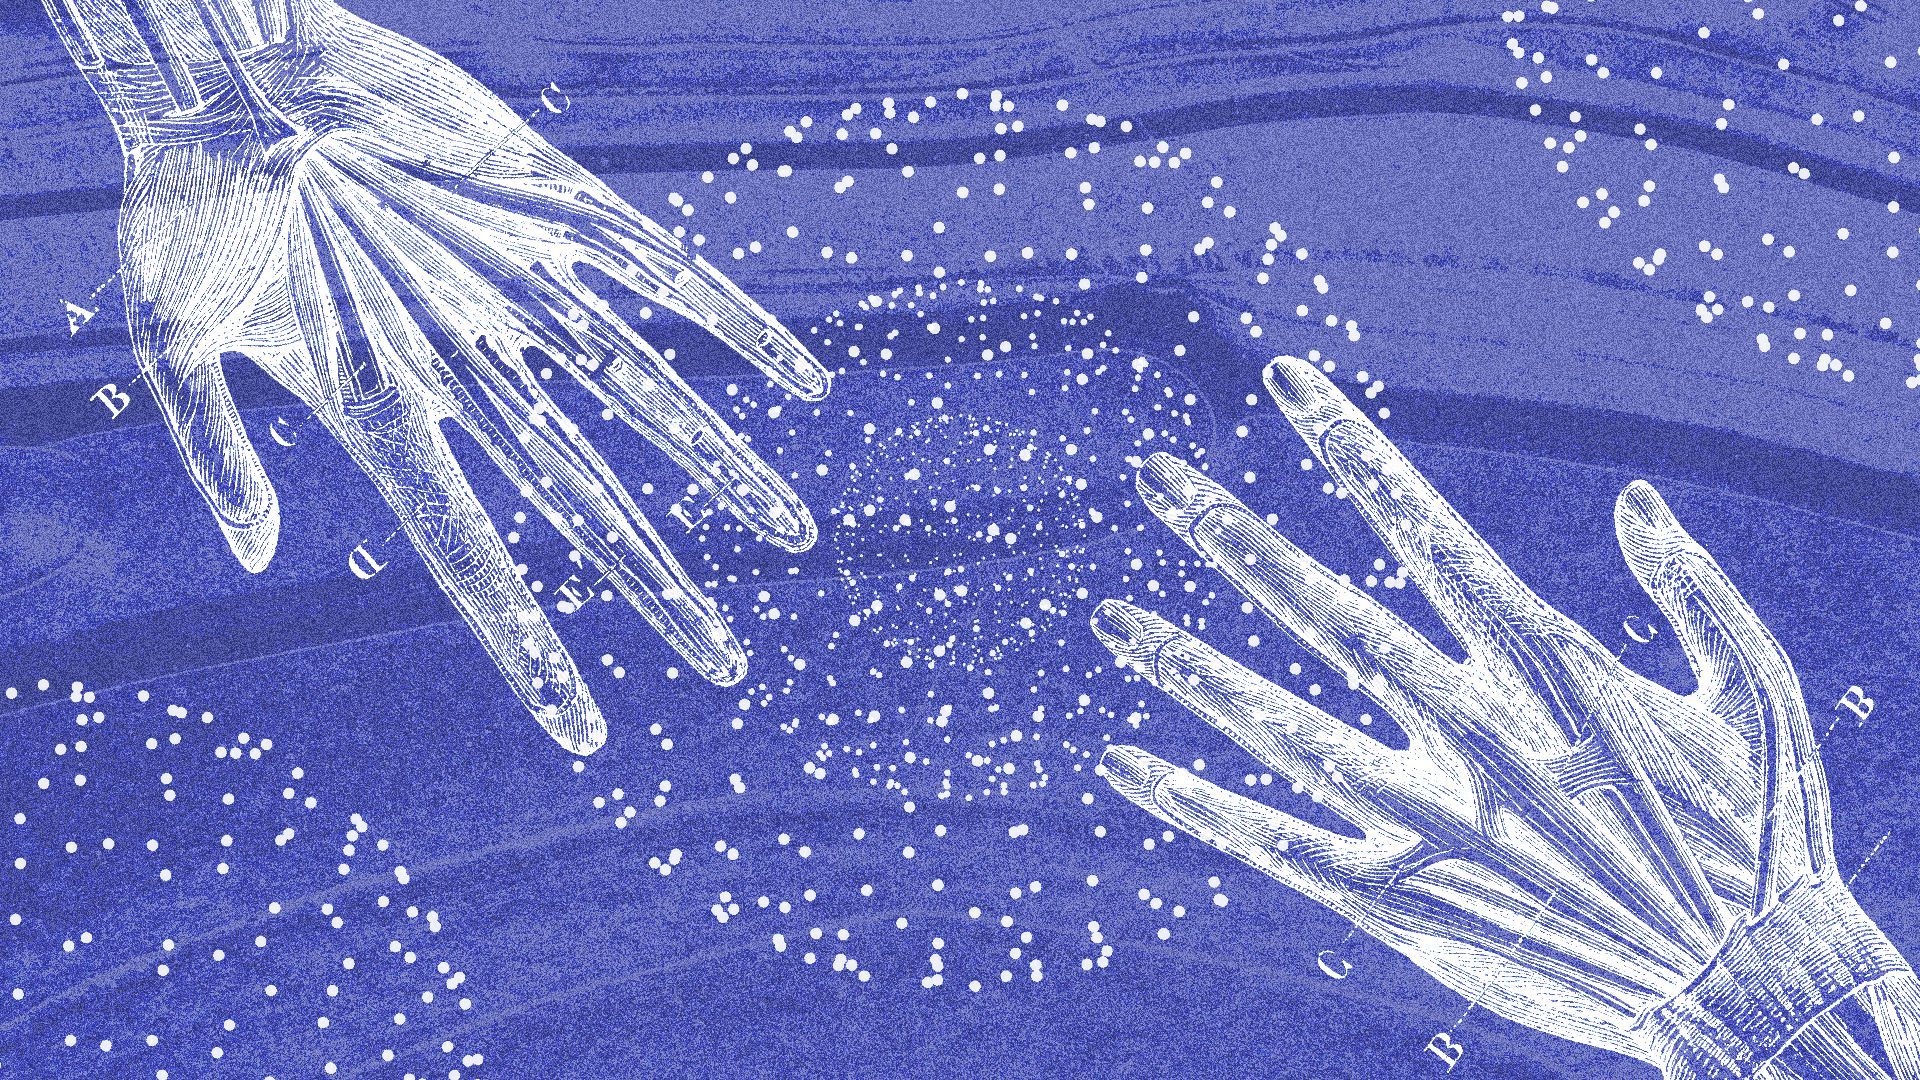 Illustration of two medical diagrams of hands reaching for each other across an abstract background.